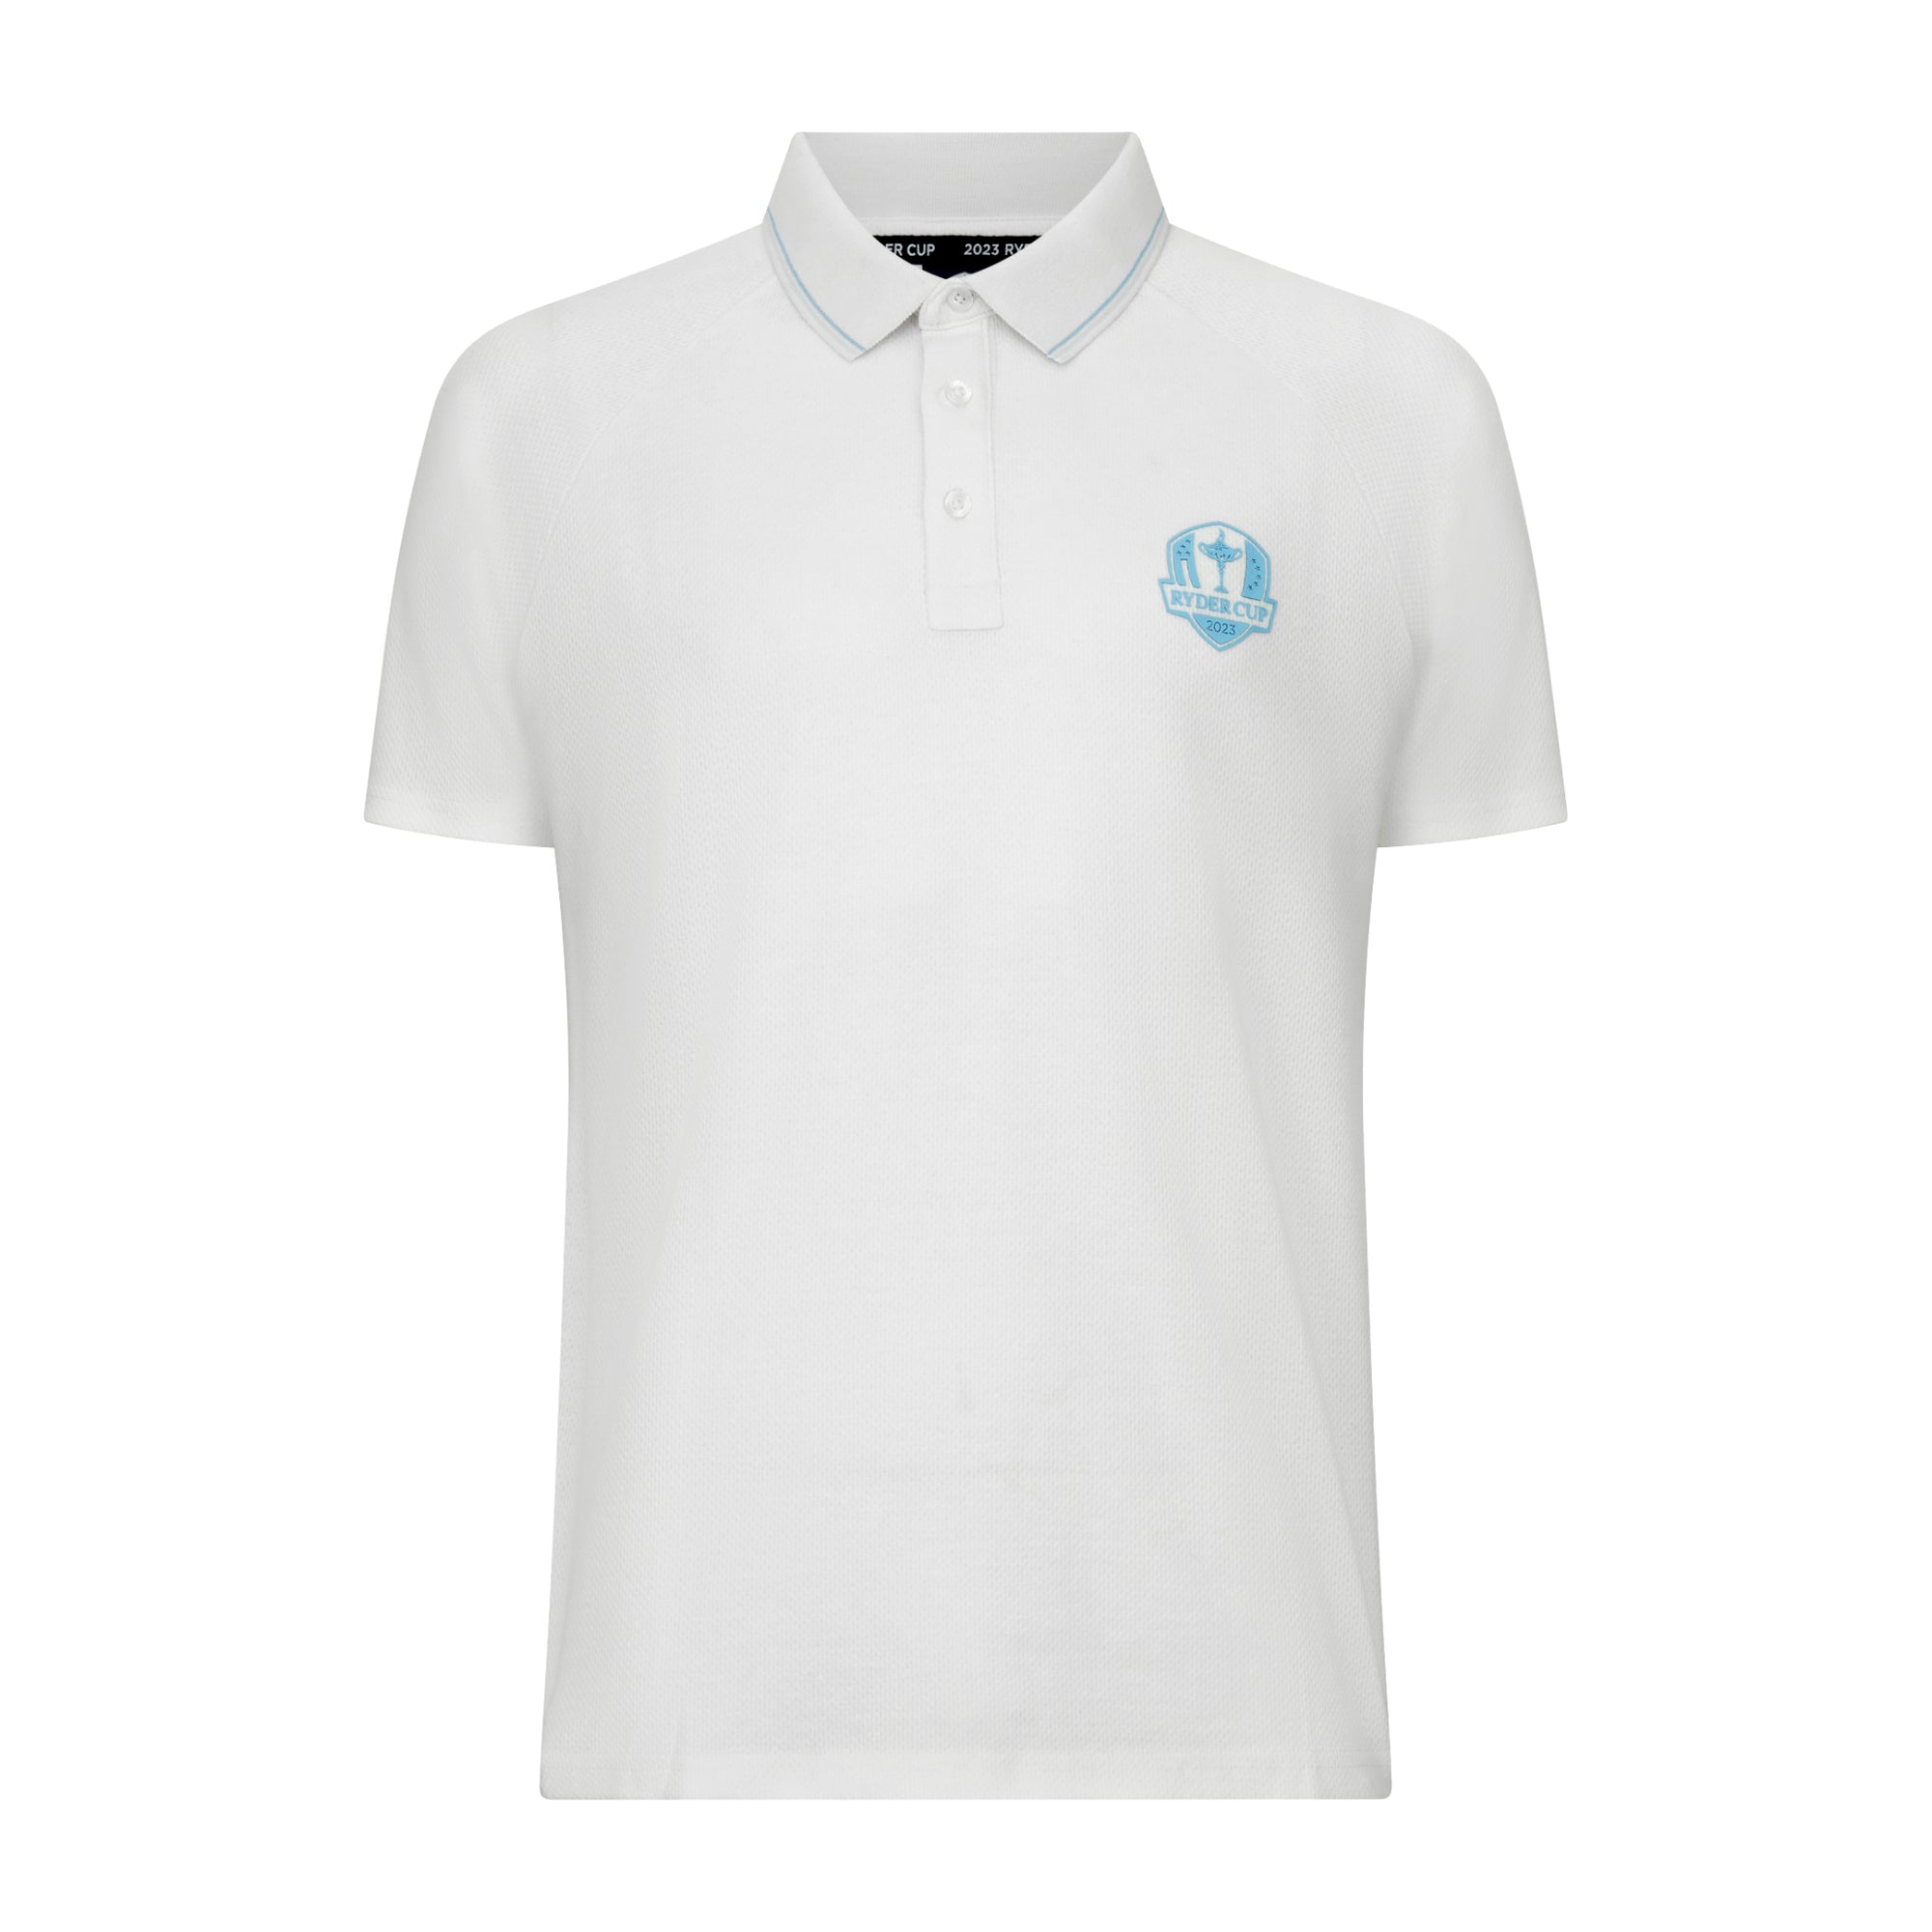 2023 Ryder Cup Men's White Polo Shirt - Front